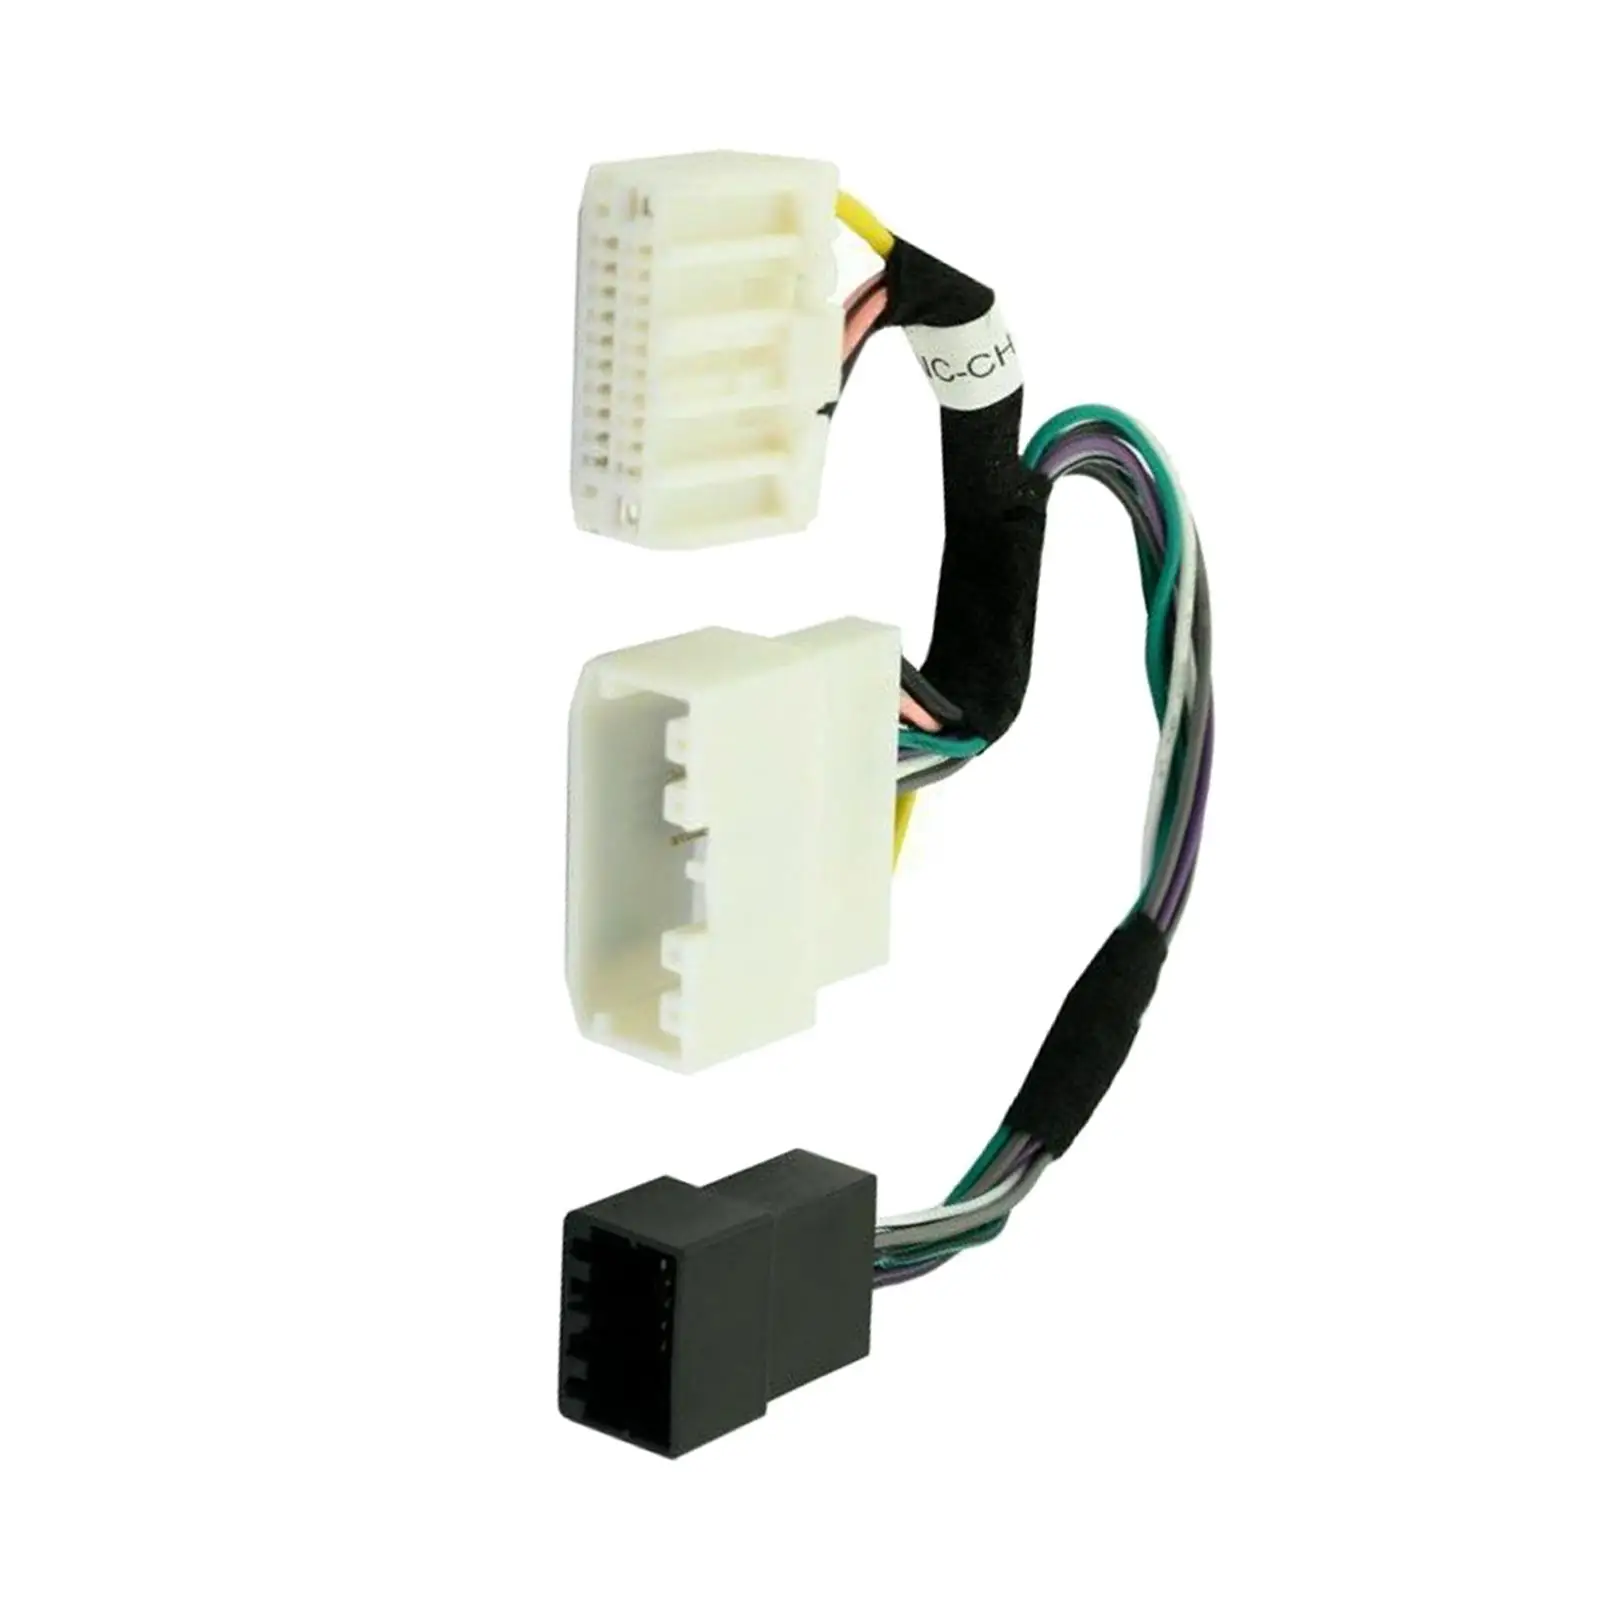 Anc-Ch01 Direct Replaces Durable Easy to Install Accessories ANC Module Bypass Harness for Chrysler, Jeep, RAM